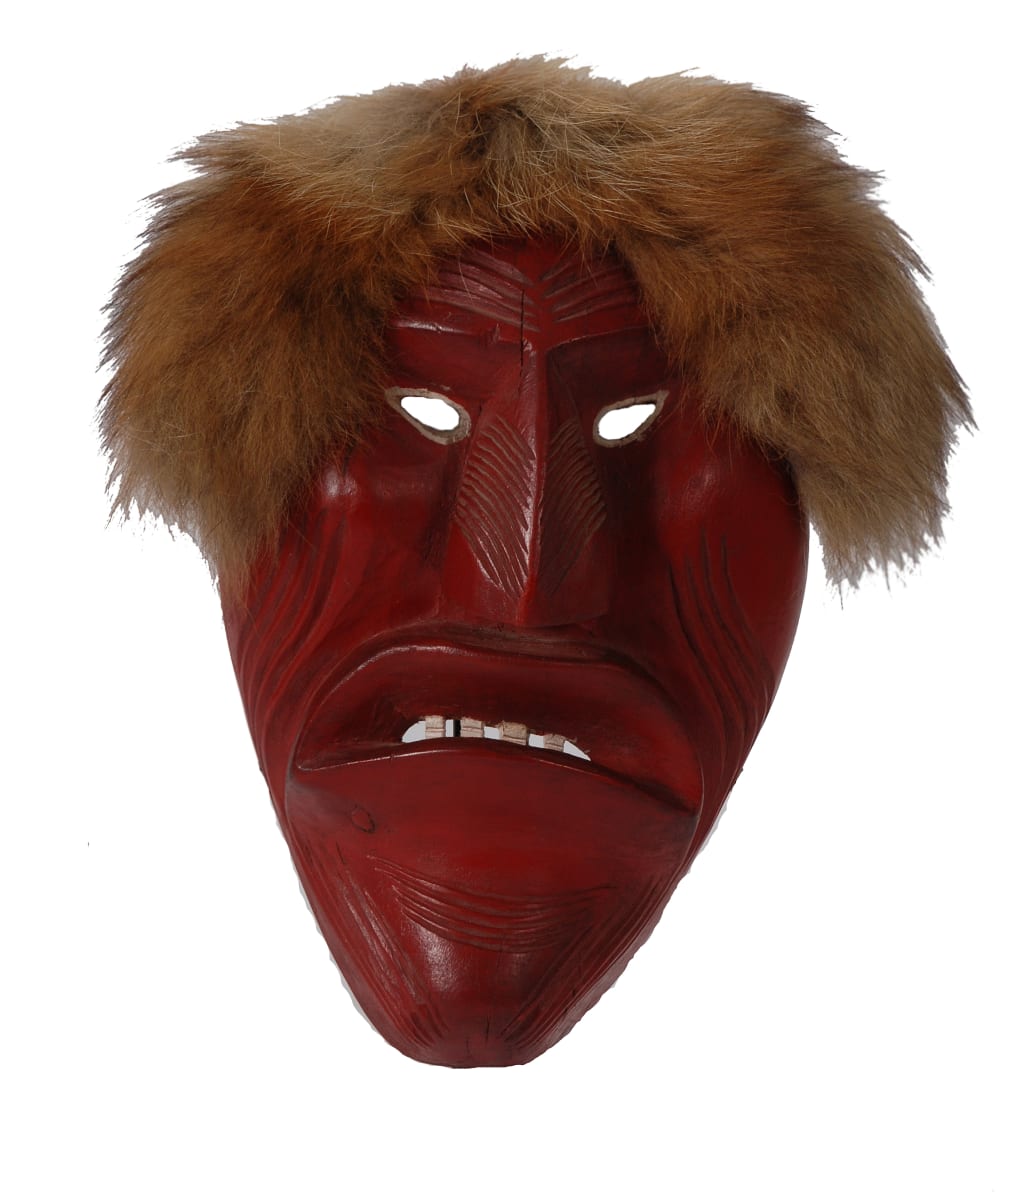 Untitled (Red Mask with Fur) by Six Nations Reserve 